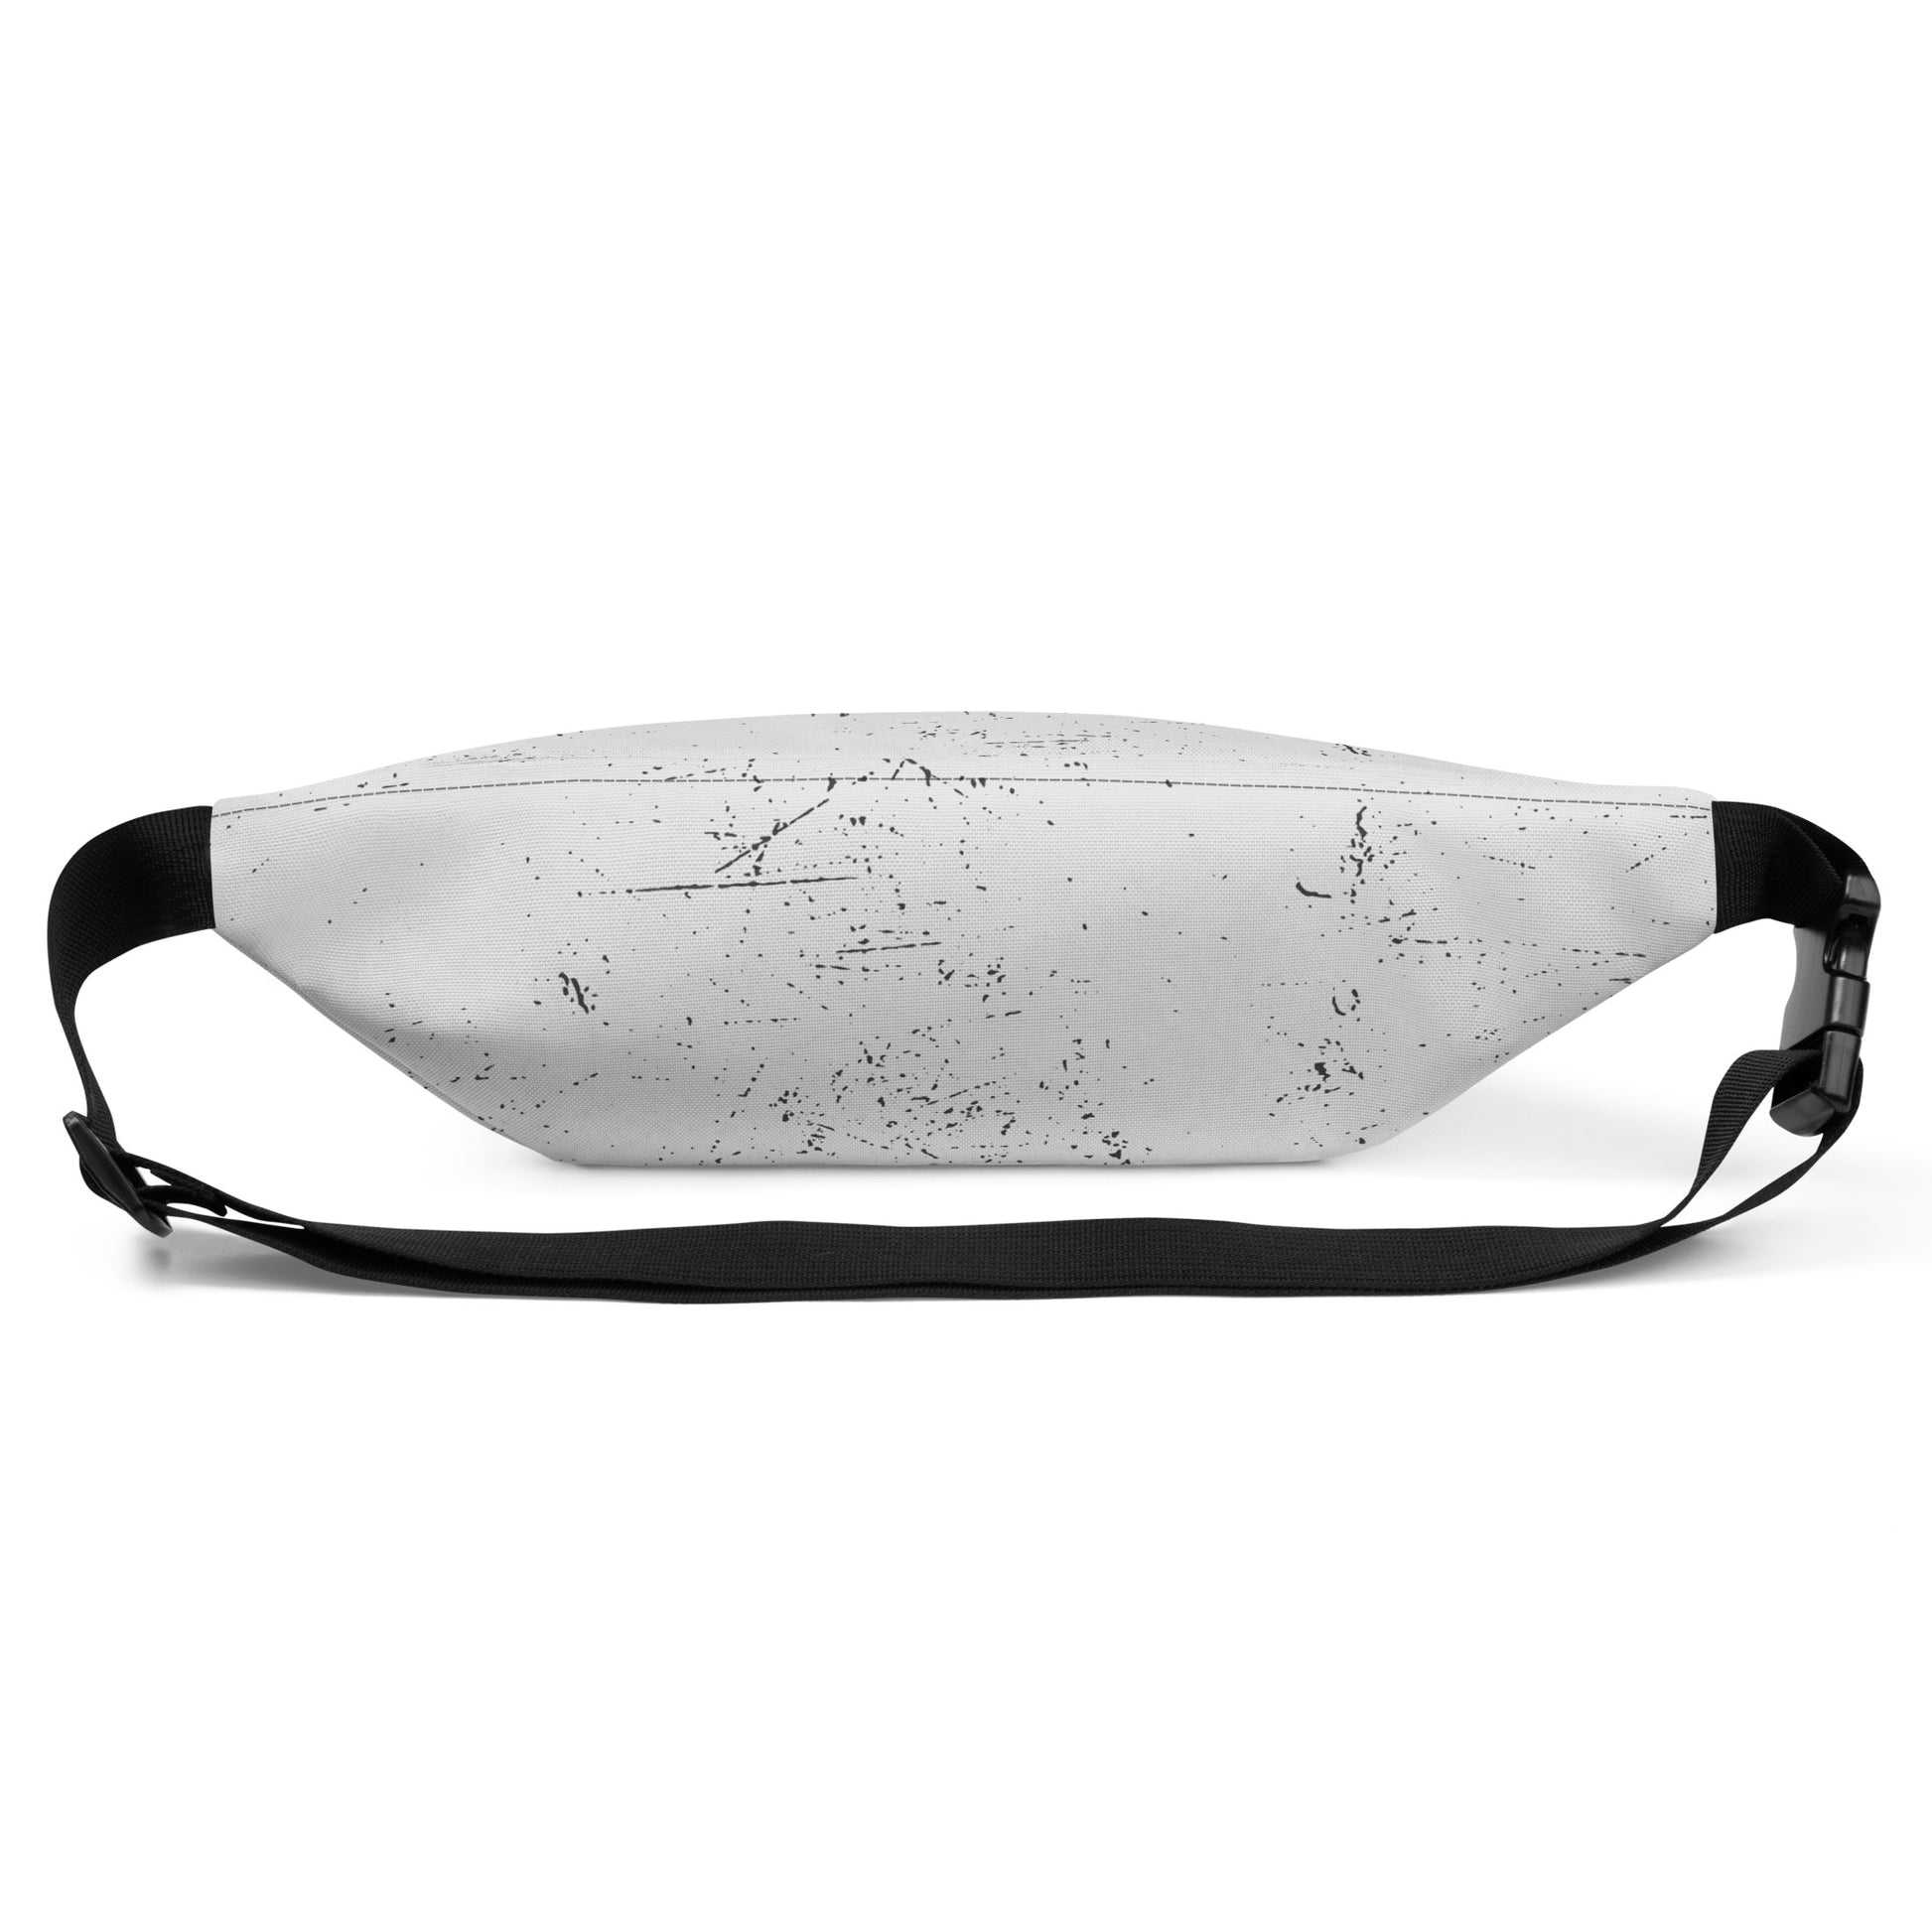 The Blend Compadres Fanny Pack - Another Bodega